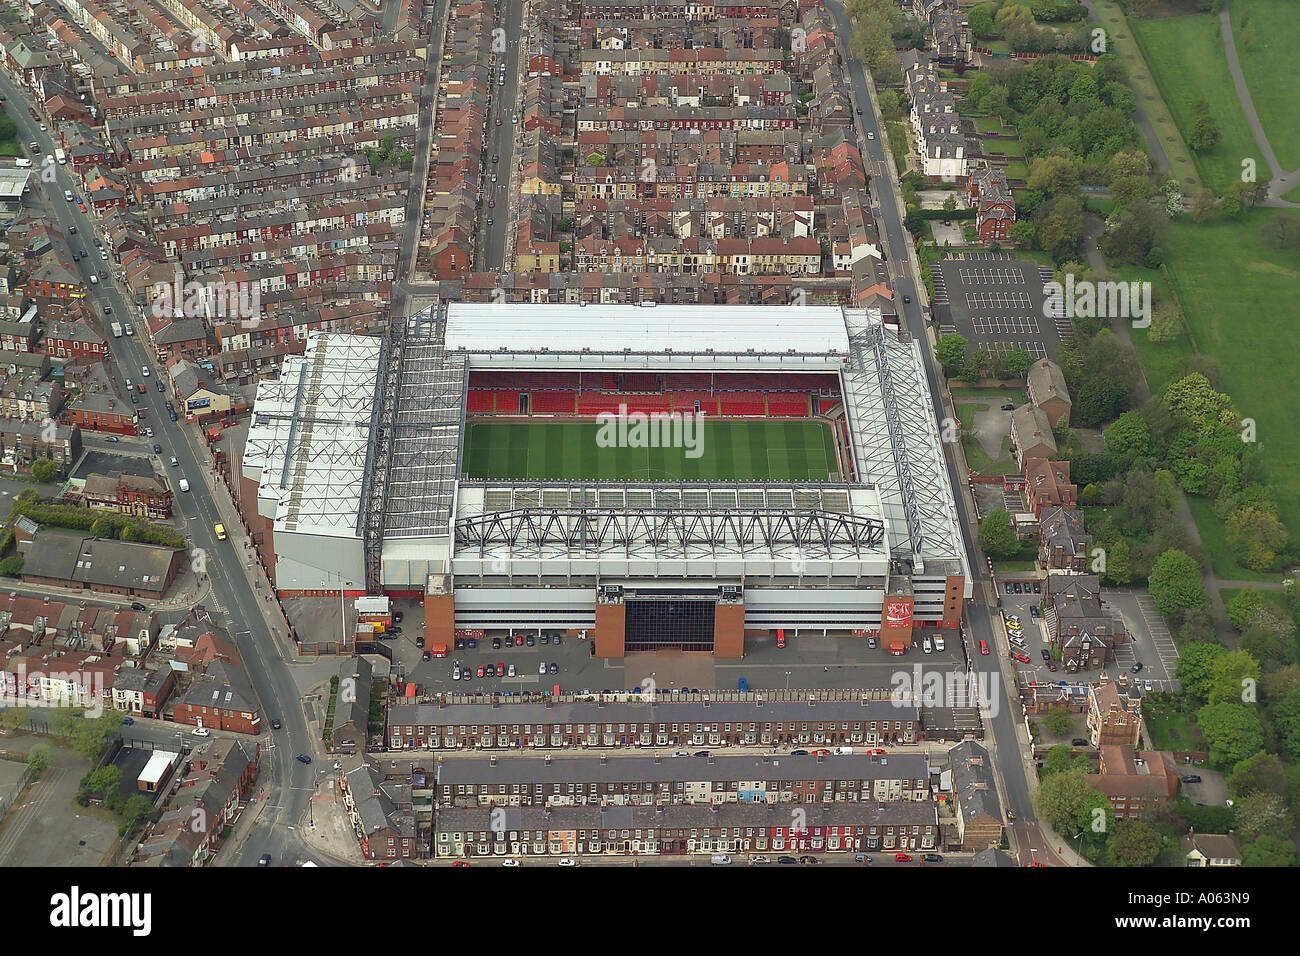 Aerial view of Liverpool Football Club who play at Anfield Stadium in Liverpool and are known as the Reds Stock Photo